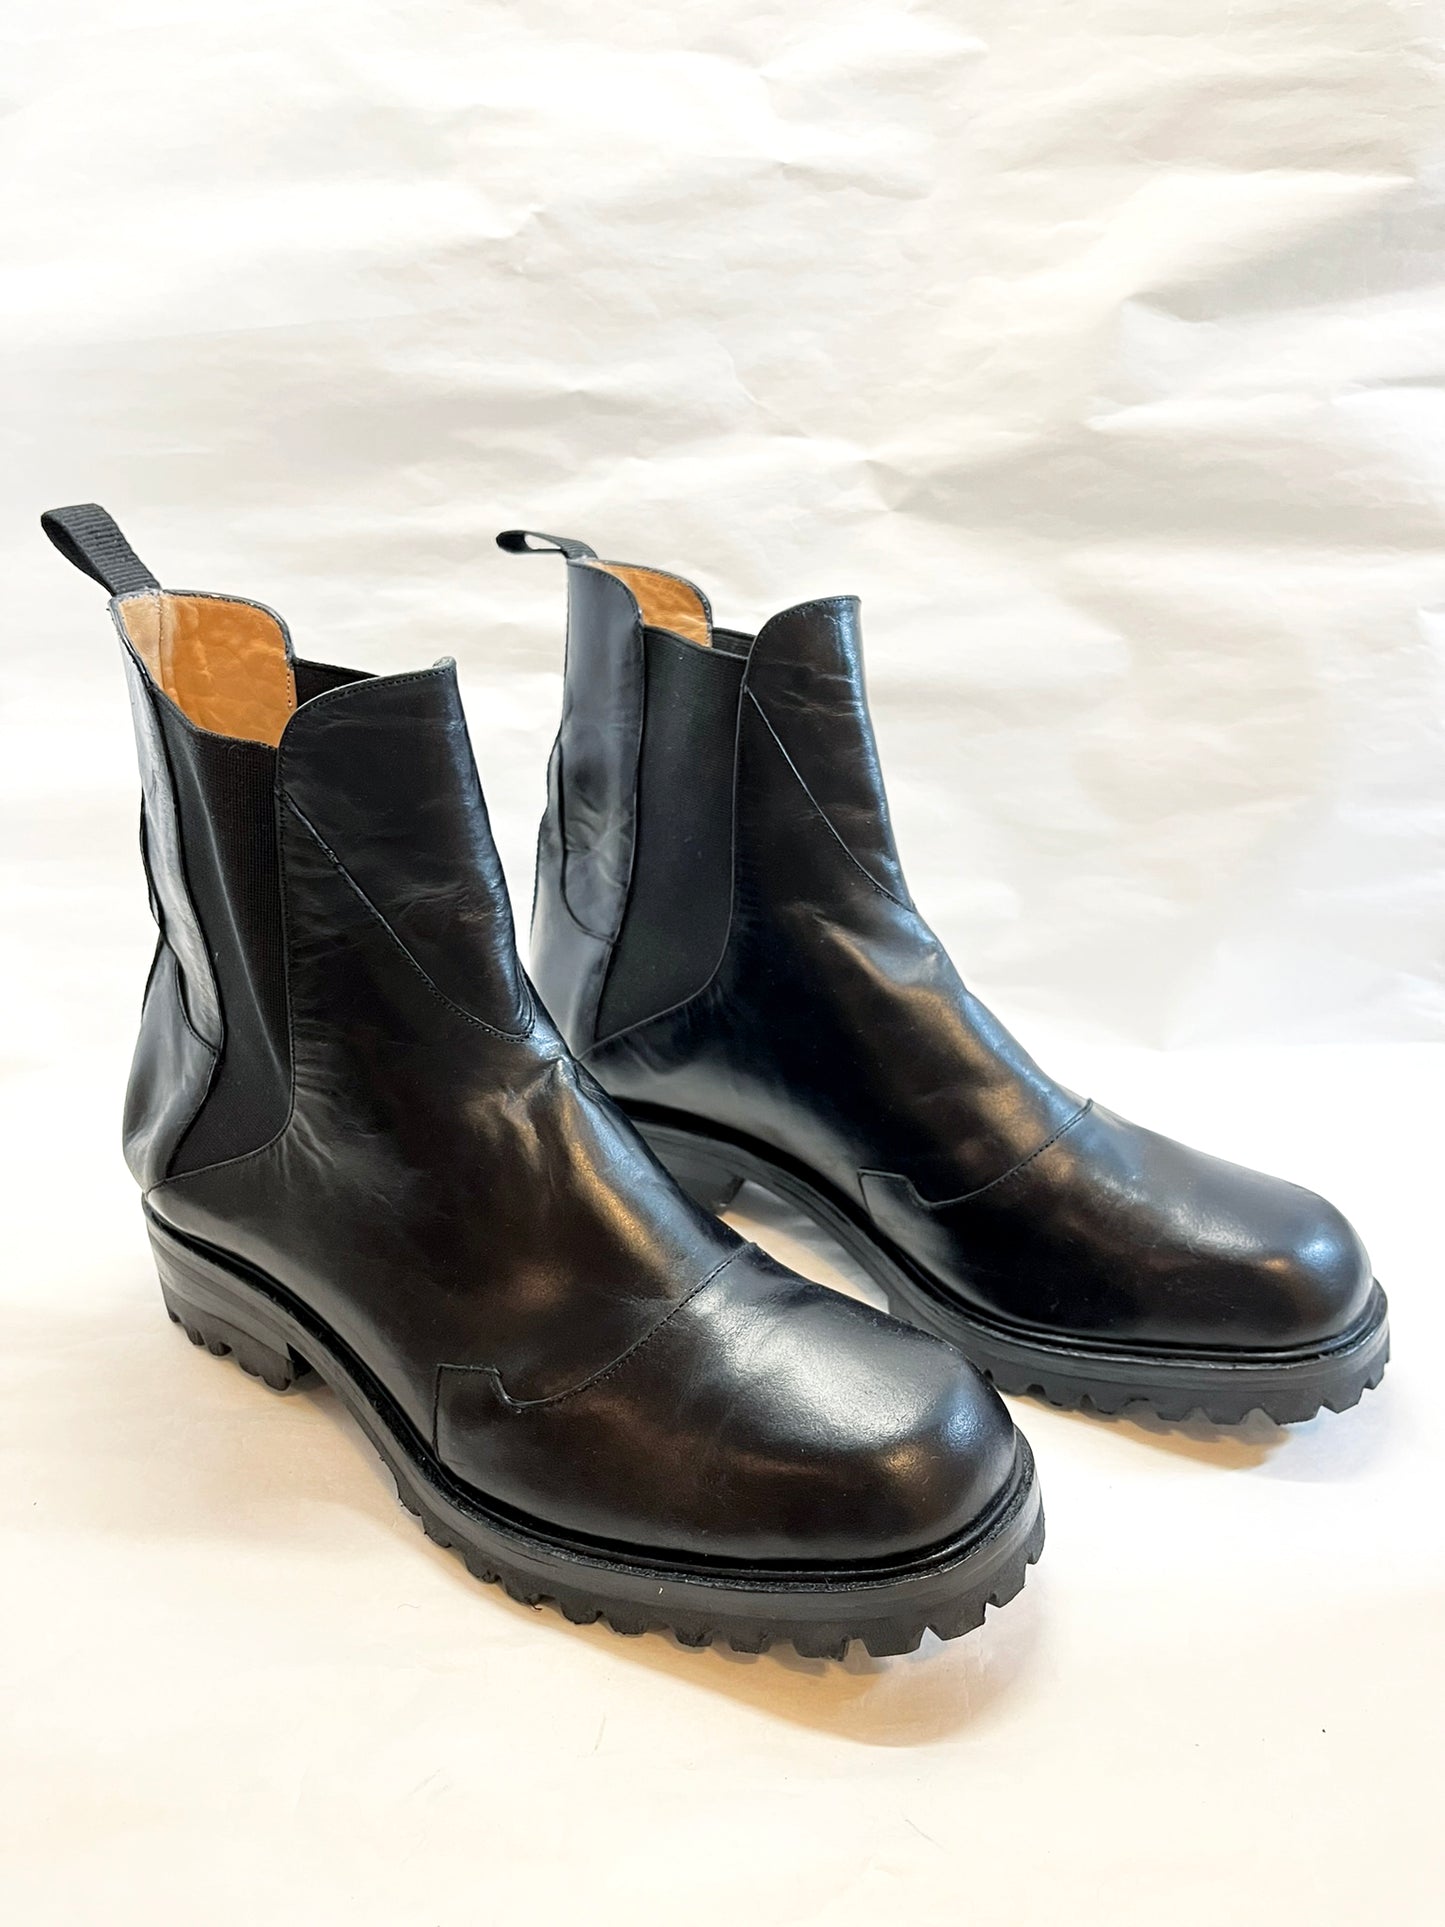 High Nerea Boot in Black Size 40